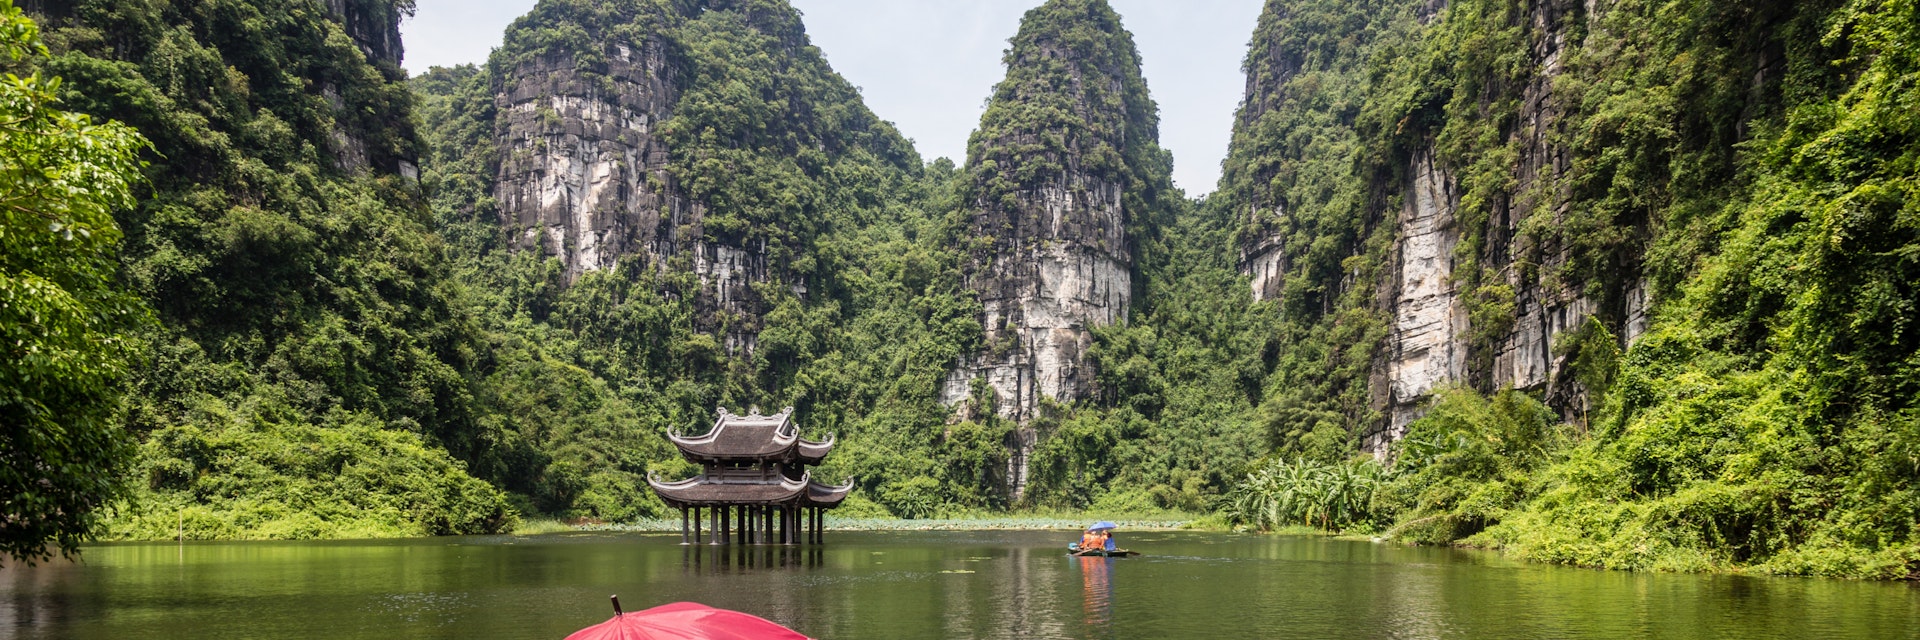 Empty sampan with red umbrella waiting for tourists surrounded by steep limestone cliffs. Small temple in the water middle distance. Location of filming for King Kong